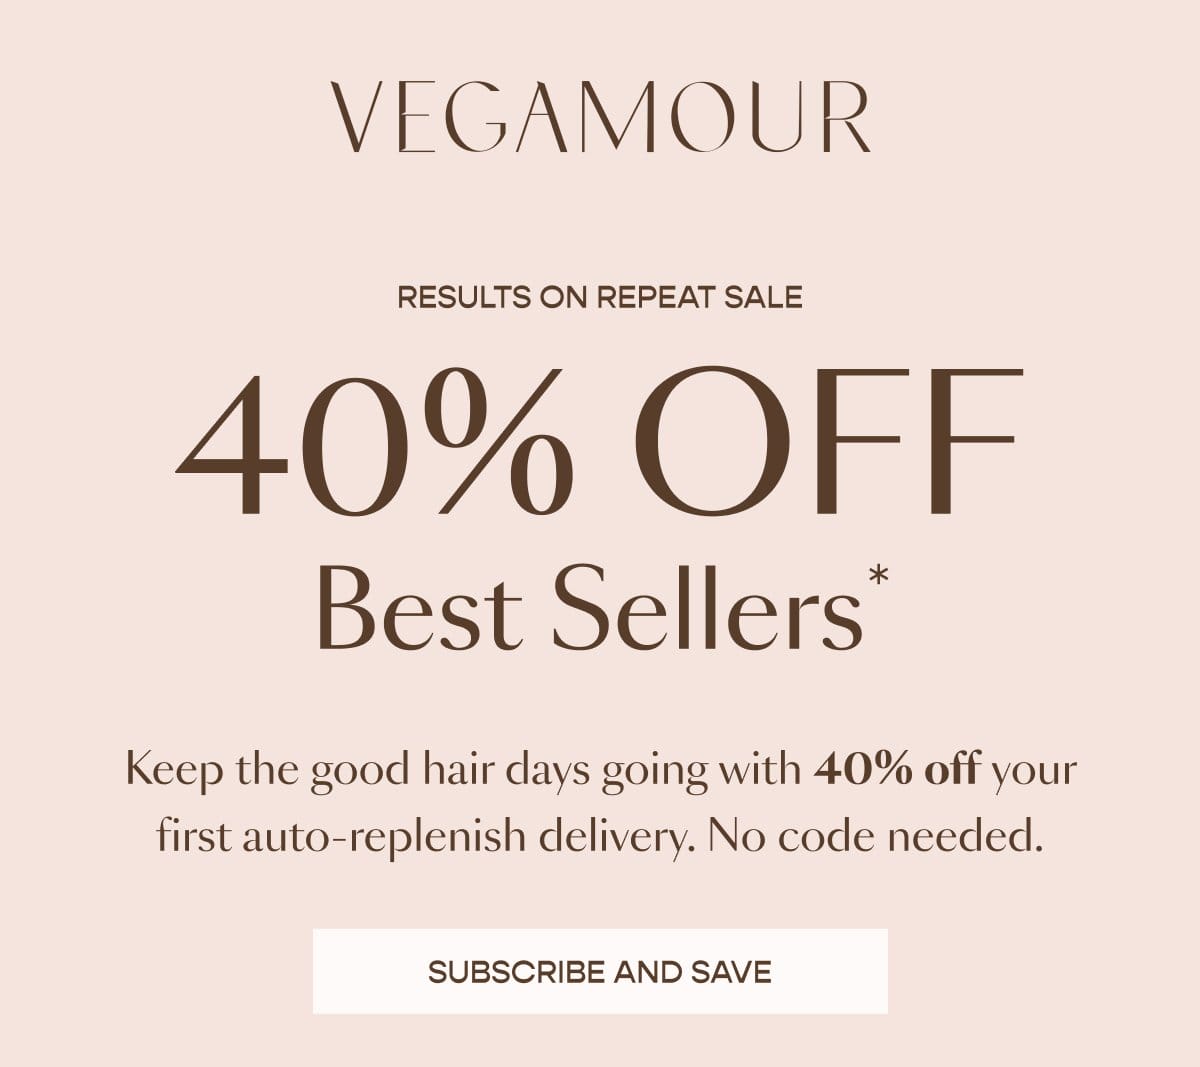 Vegamour. Results on Repeat Sale.